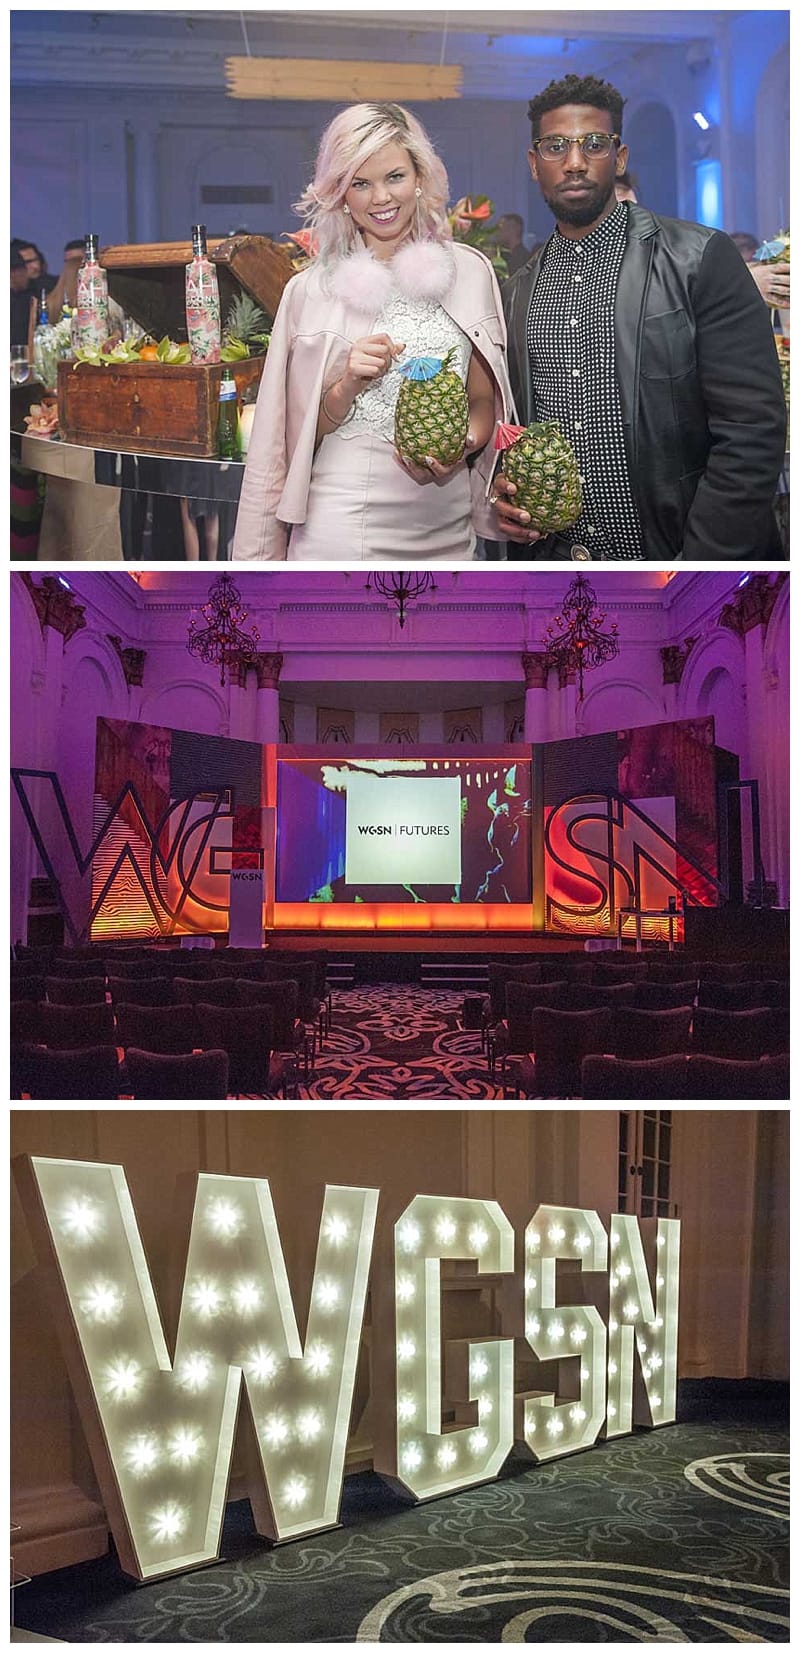 wgsn-conference-benjamin-wetherall-photography-0034